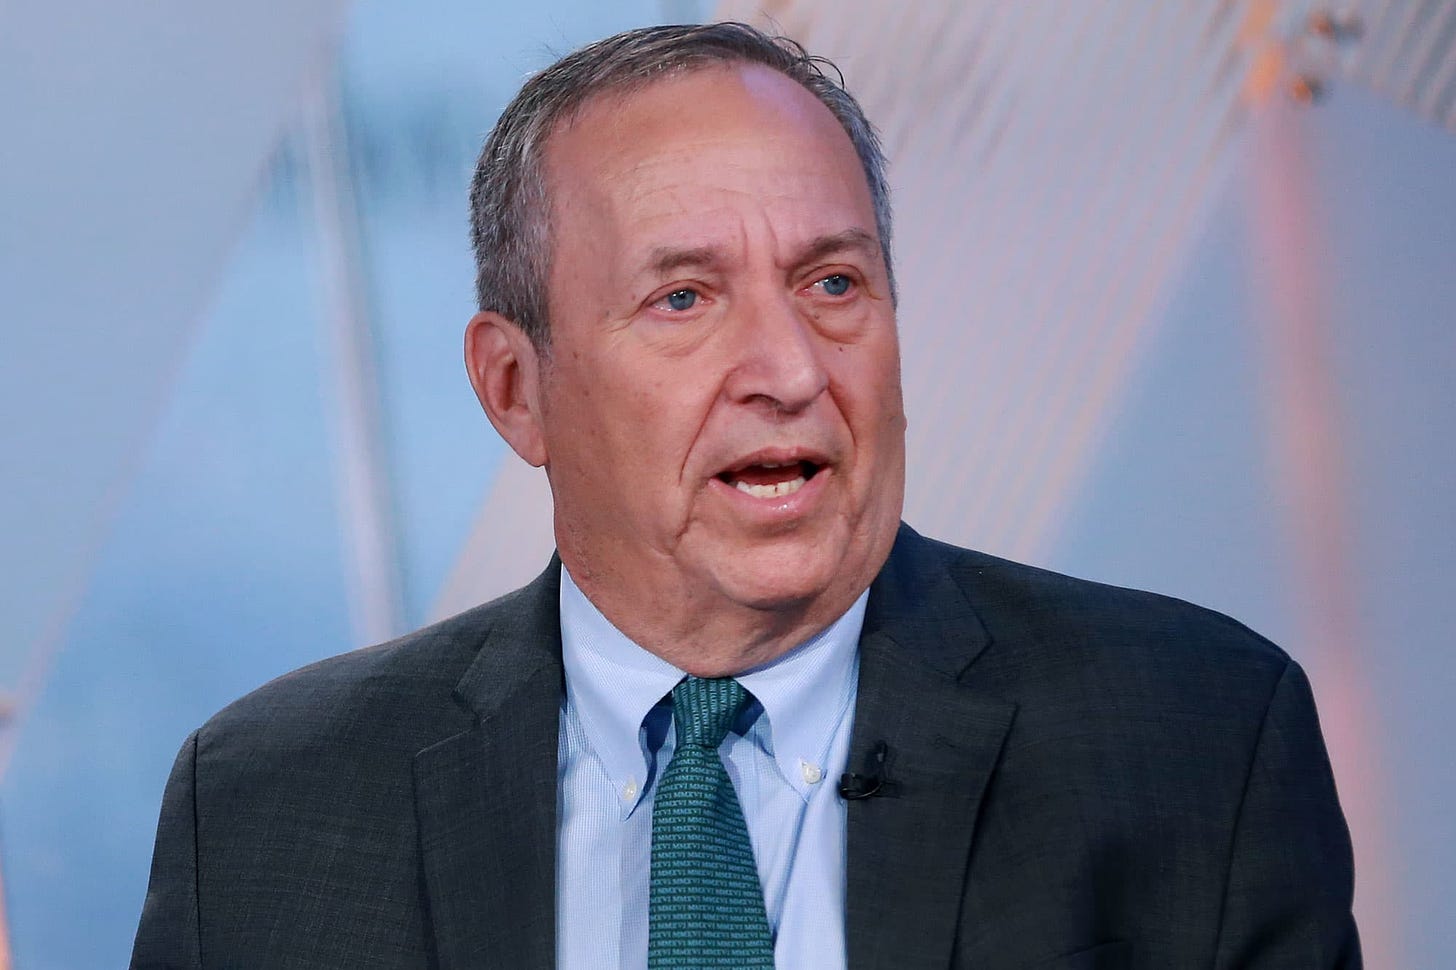 Larry Summers says the Democrats' wealth tax has 'little ...